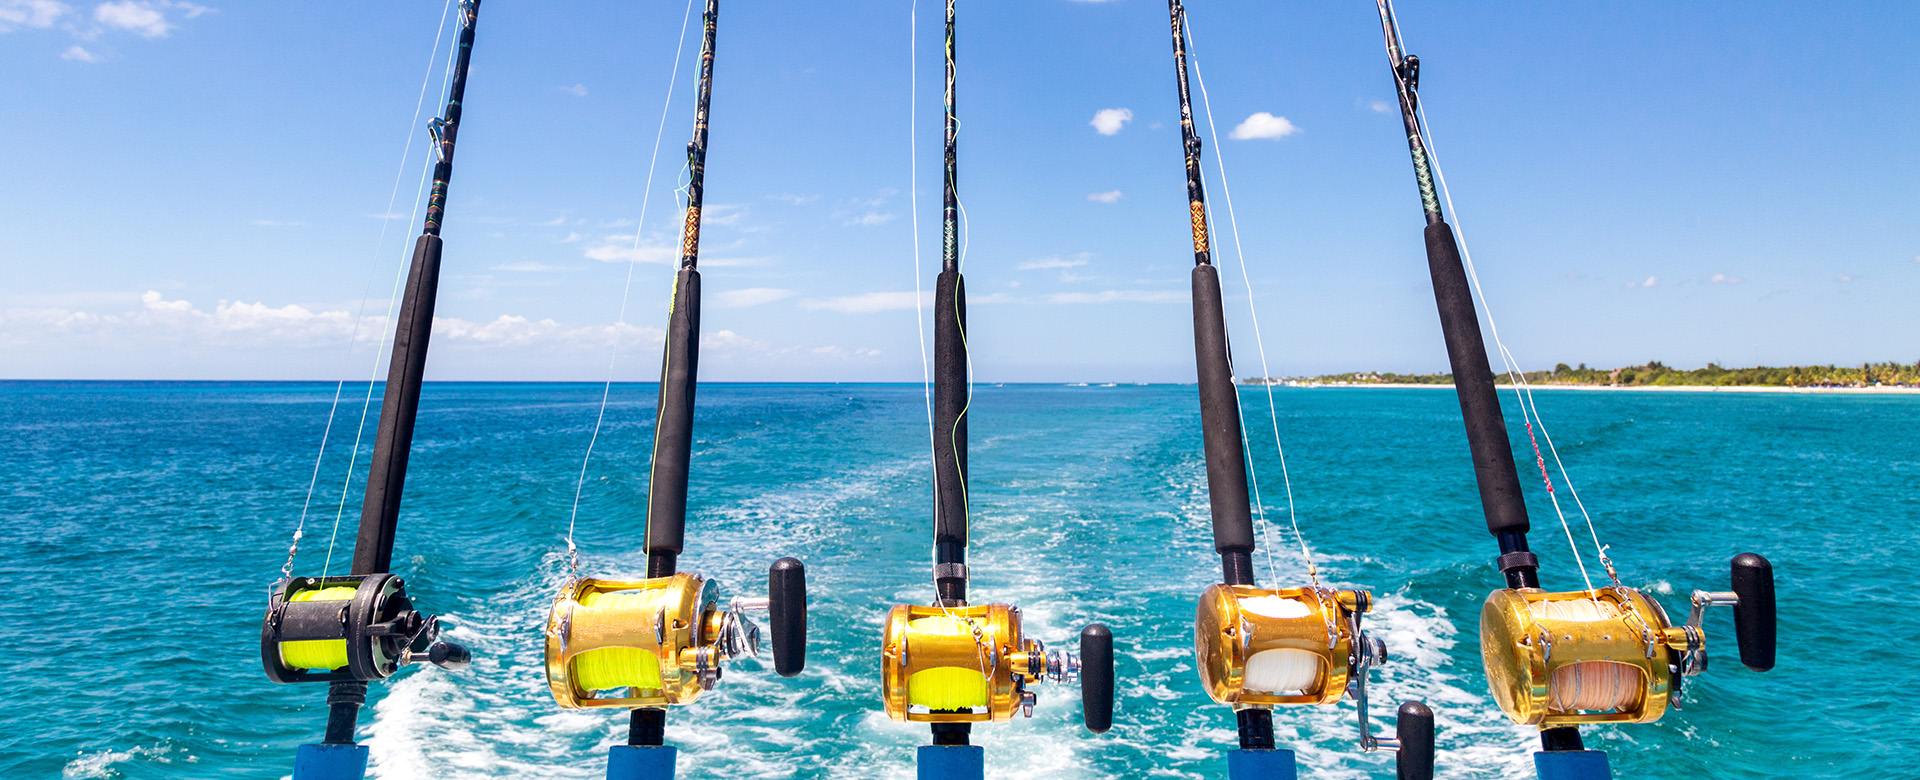 five fishing poles on a boat